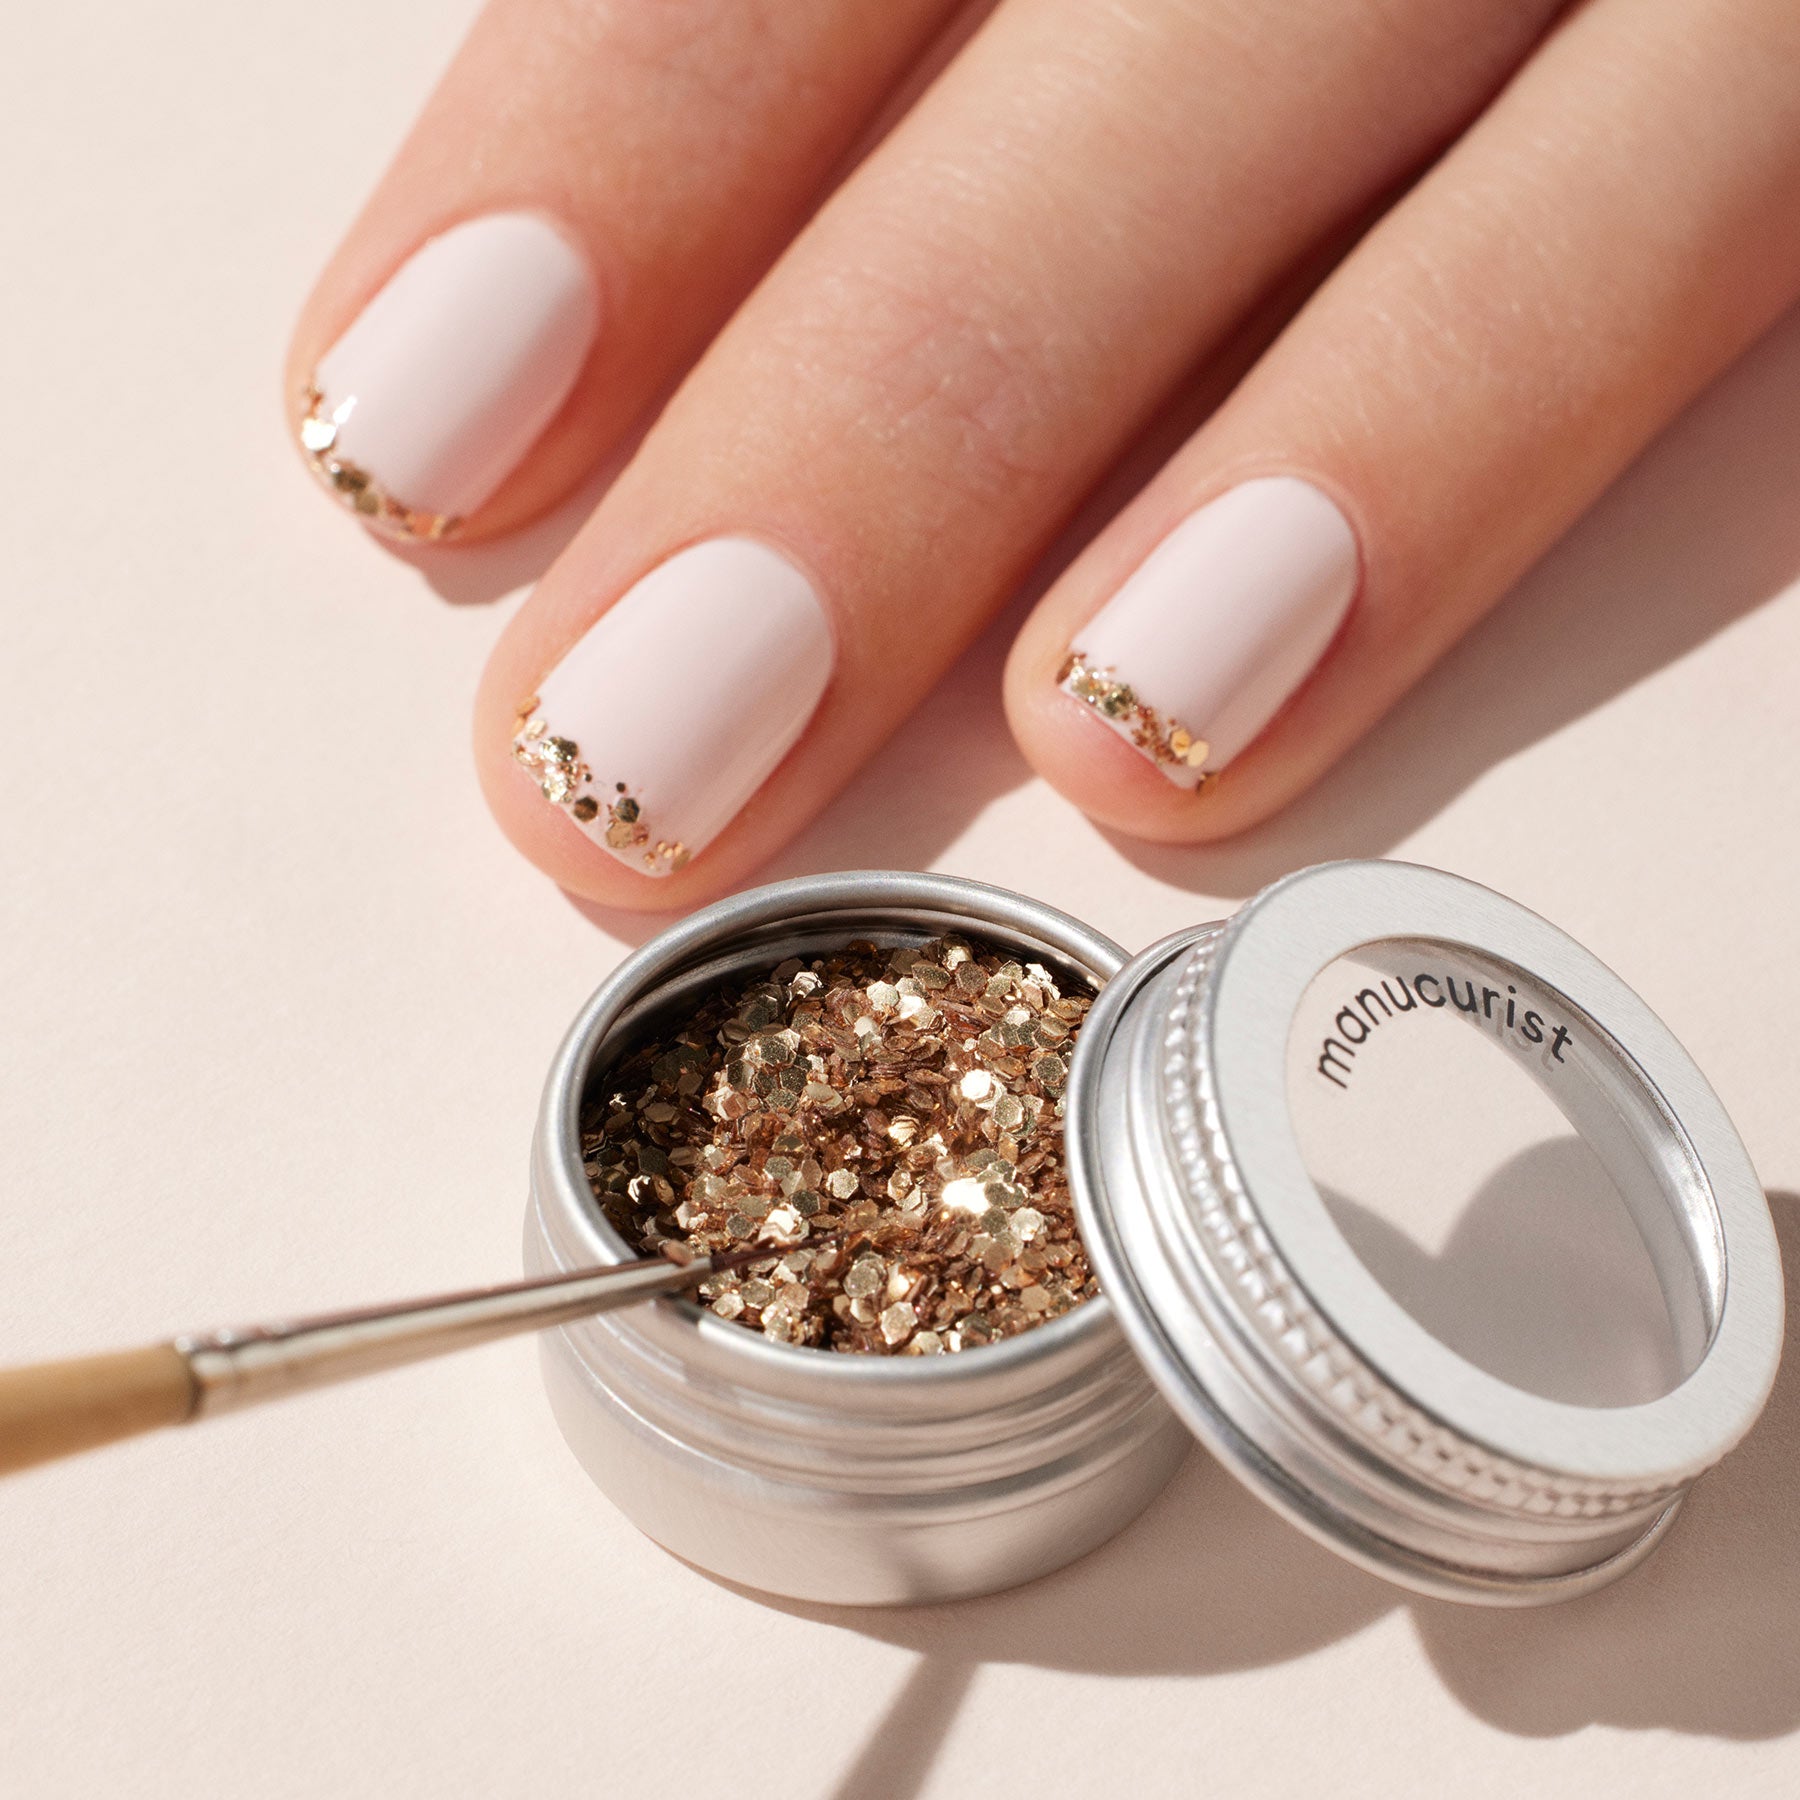 Best 8 Rose Gold Nail Art Ideas to Consider for Your Upcoming Pedicure -  impressions salon